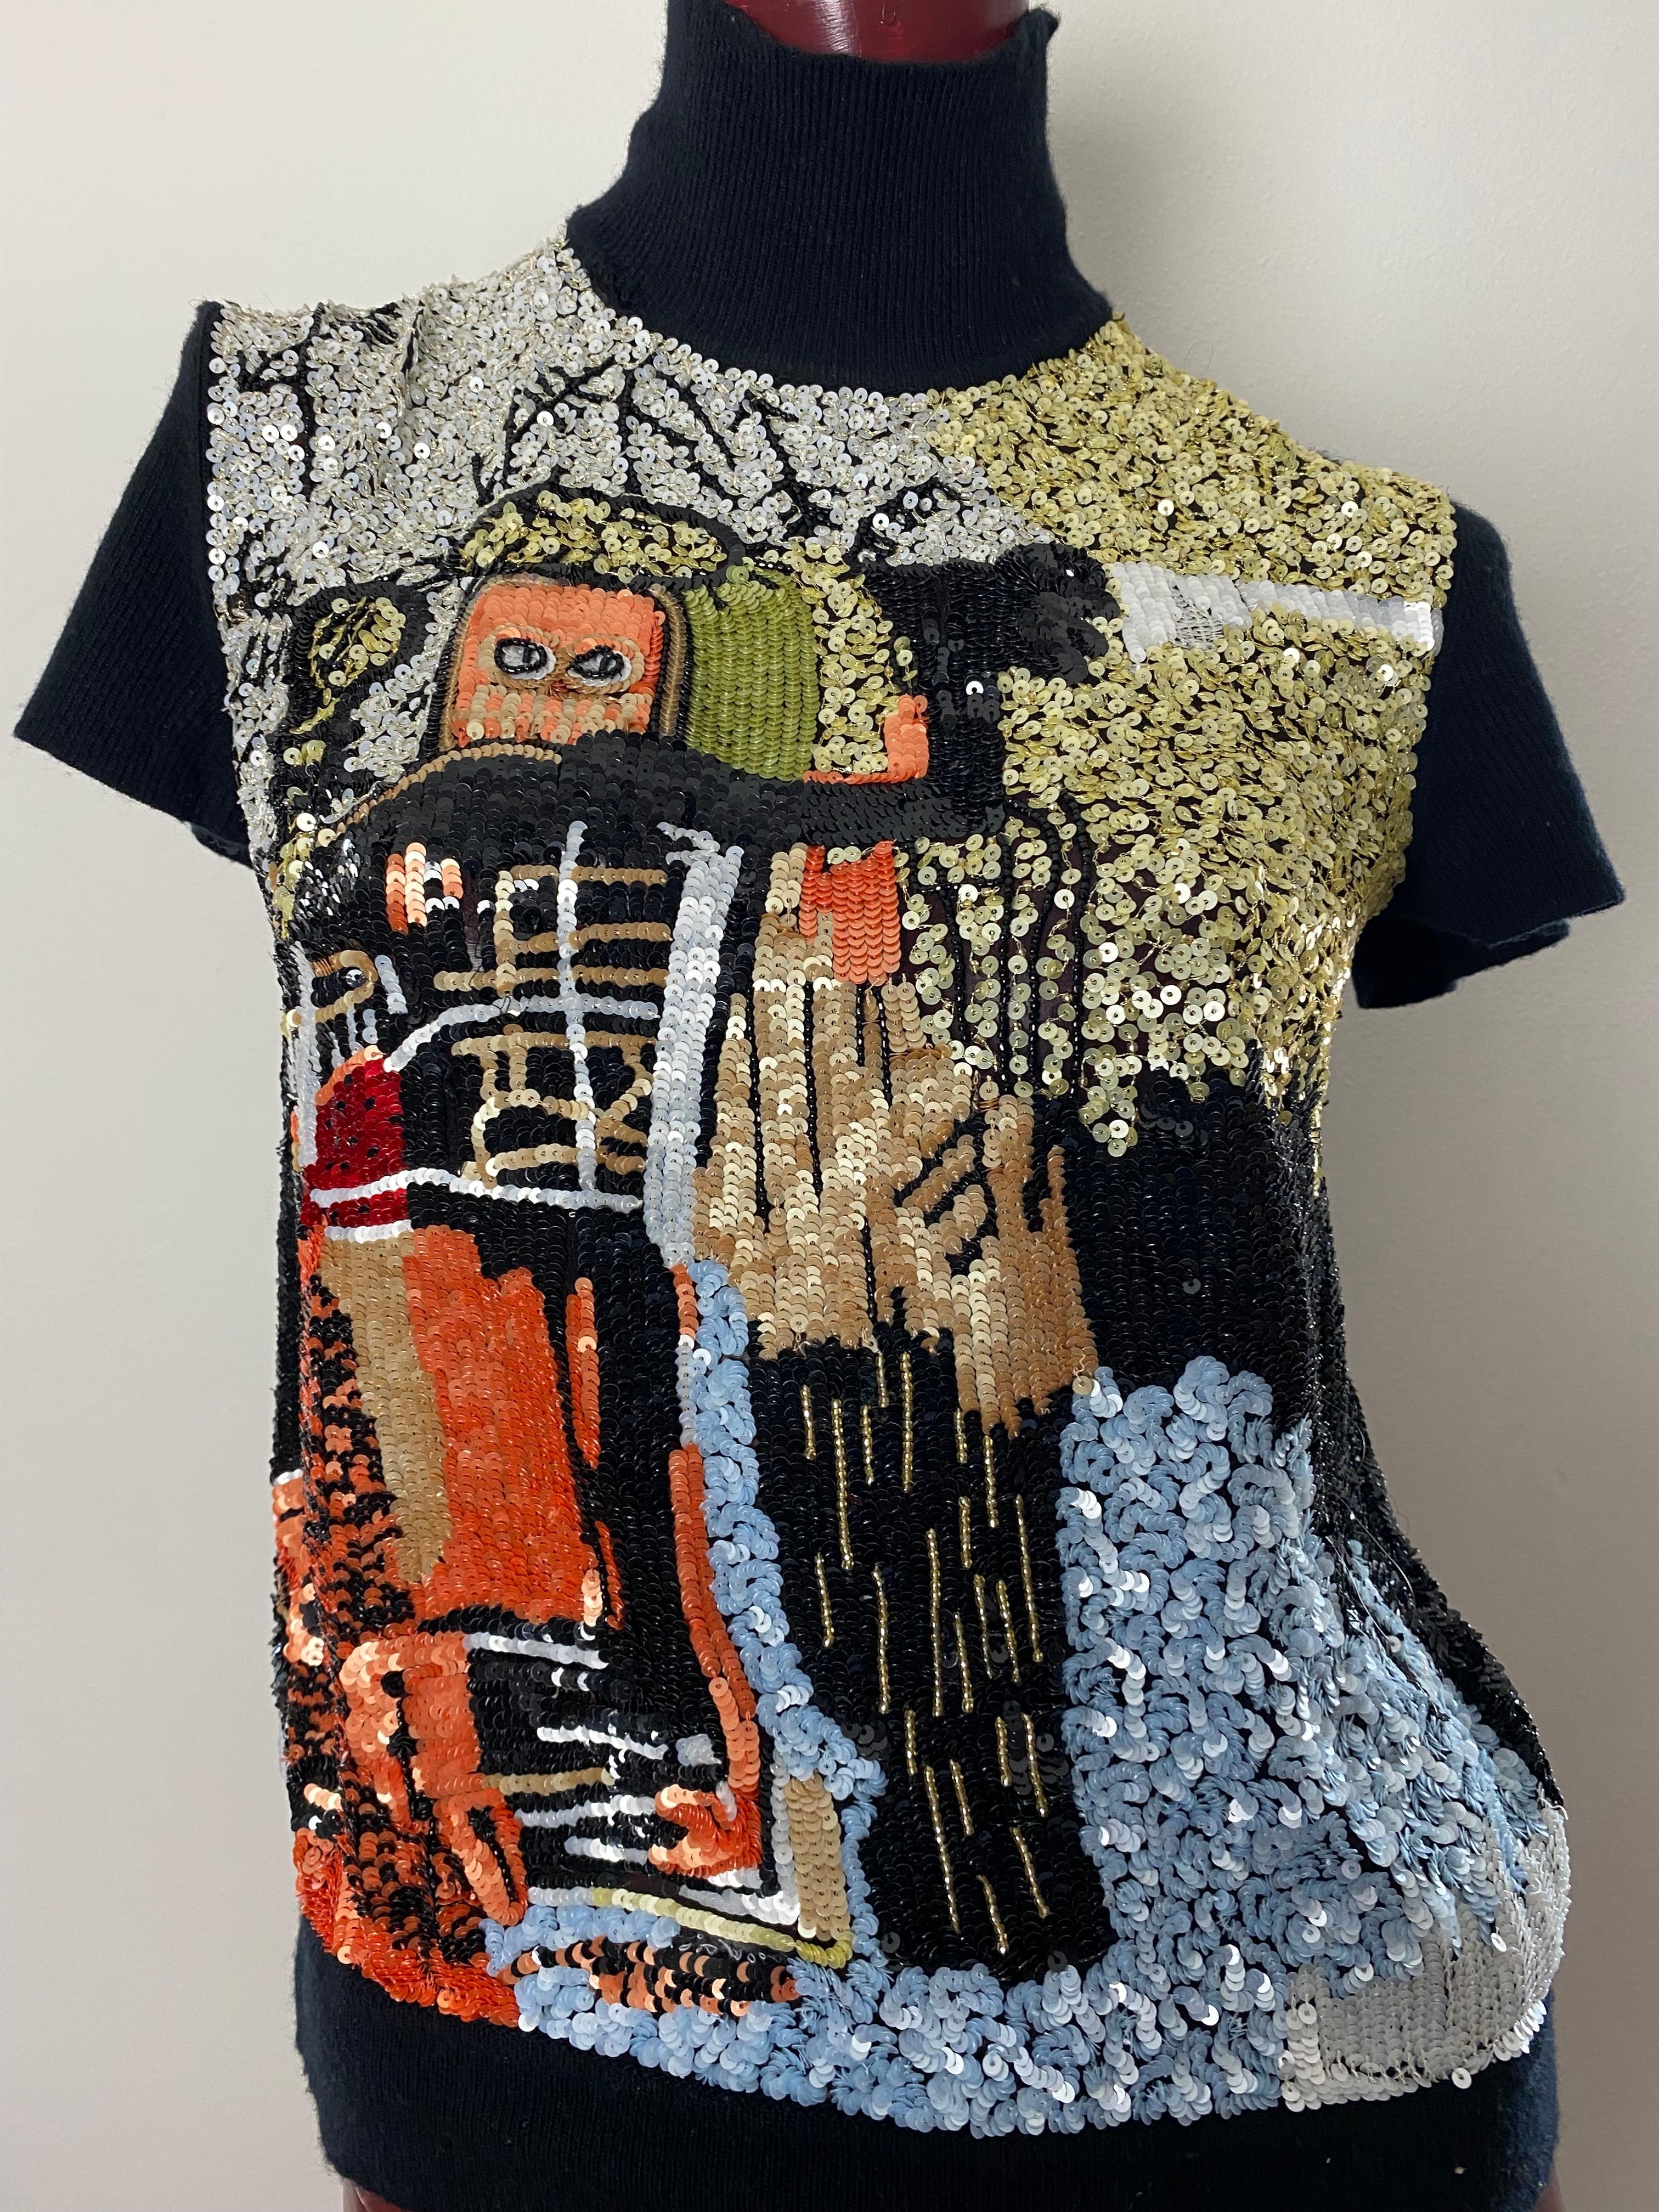 Valentino turtleneck with wonderful pailletes embroidery Basquiat picture For Sale 6